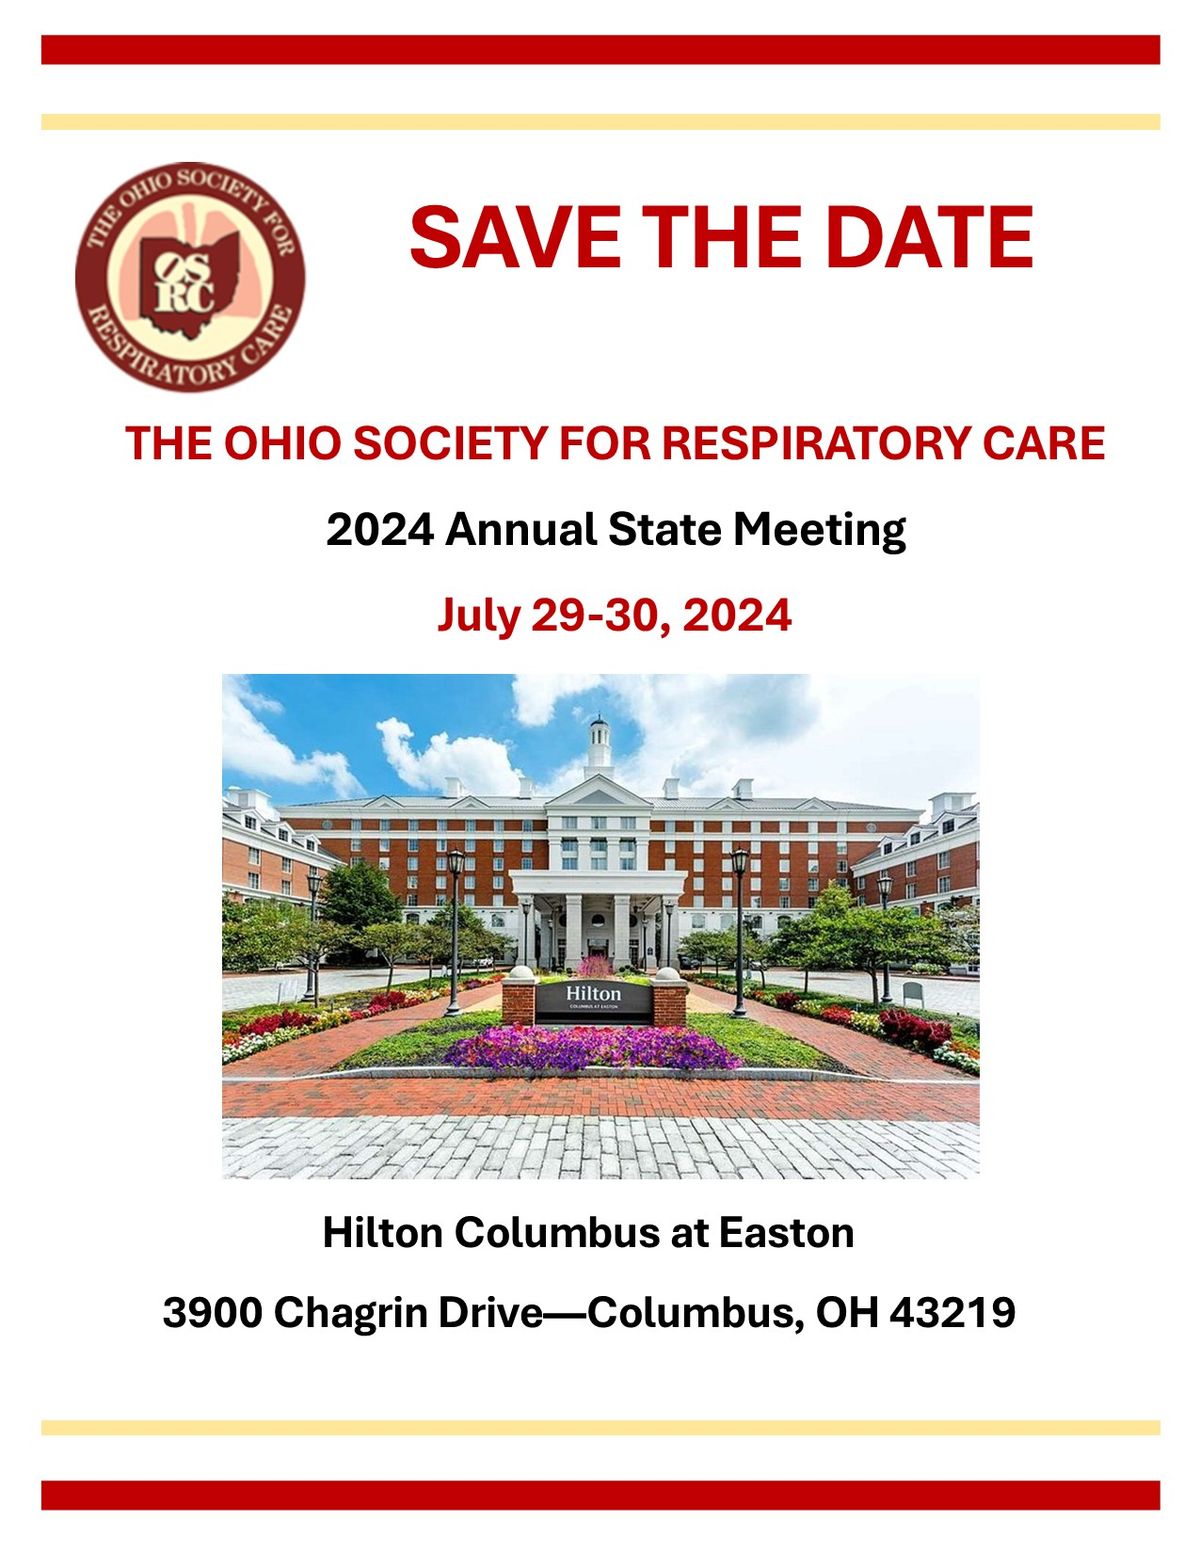 OSRC 46th Annual State Meeting